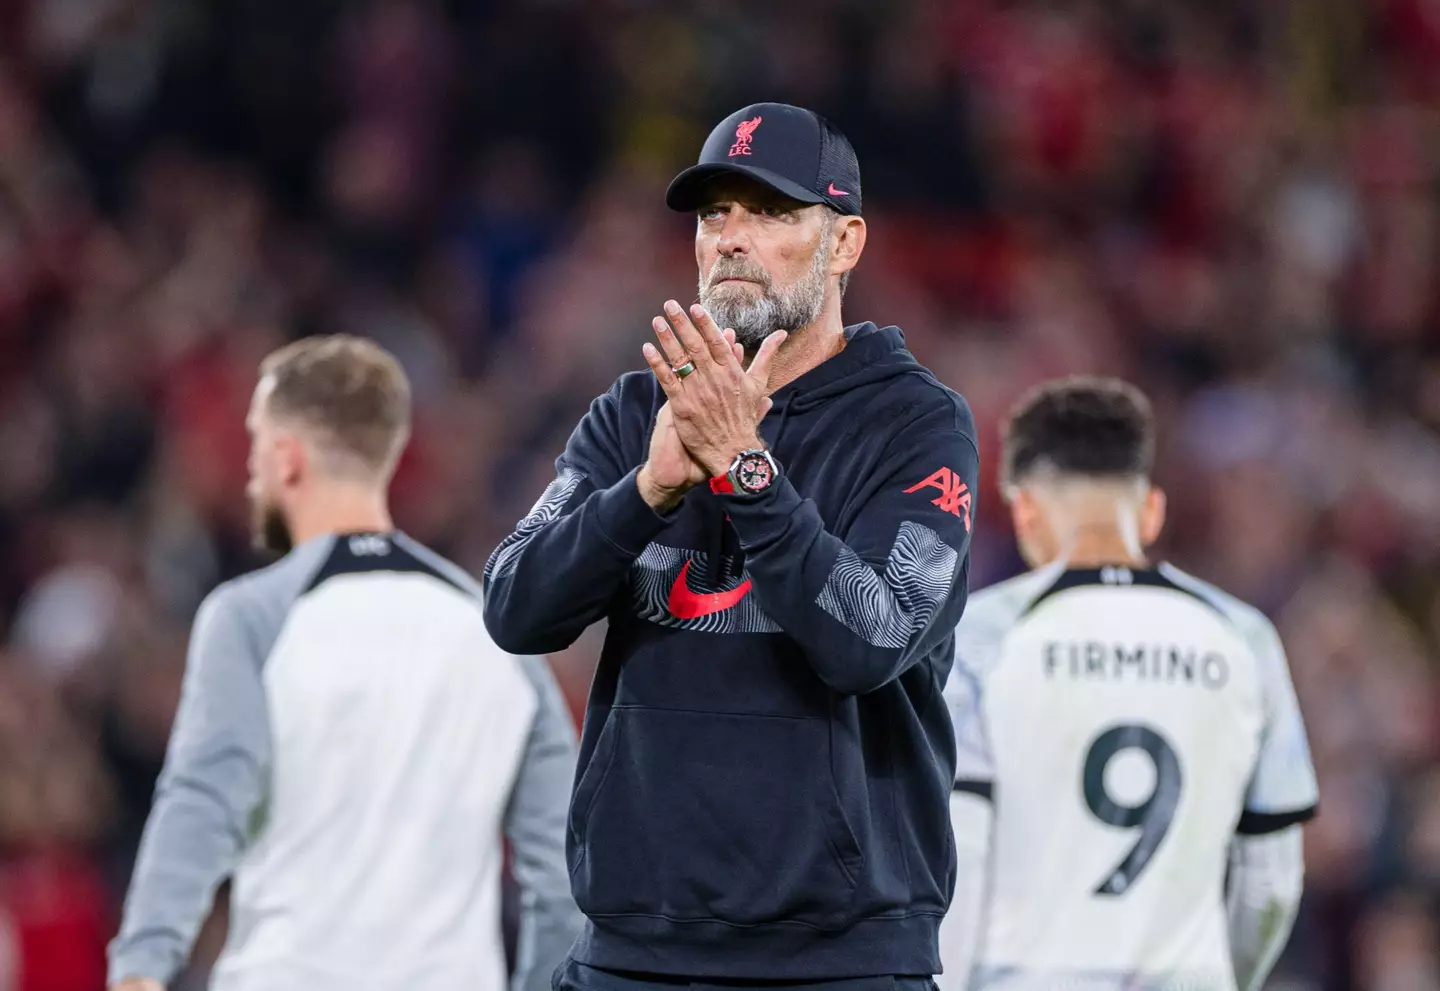 Klopp was not happy at full time. Image: Alamy